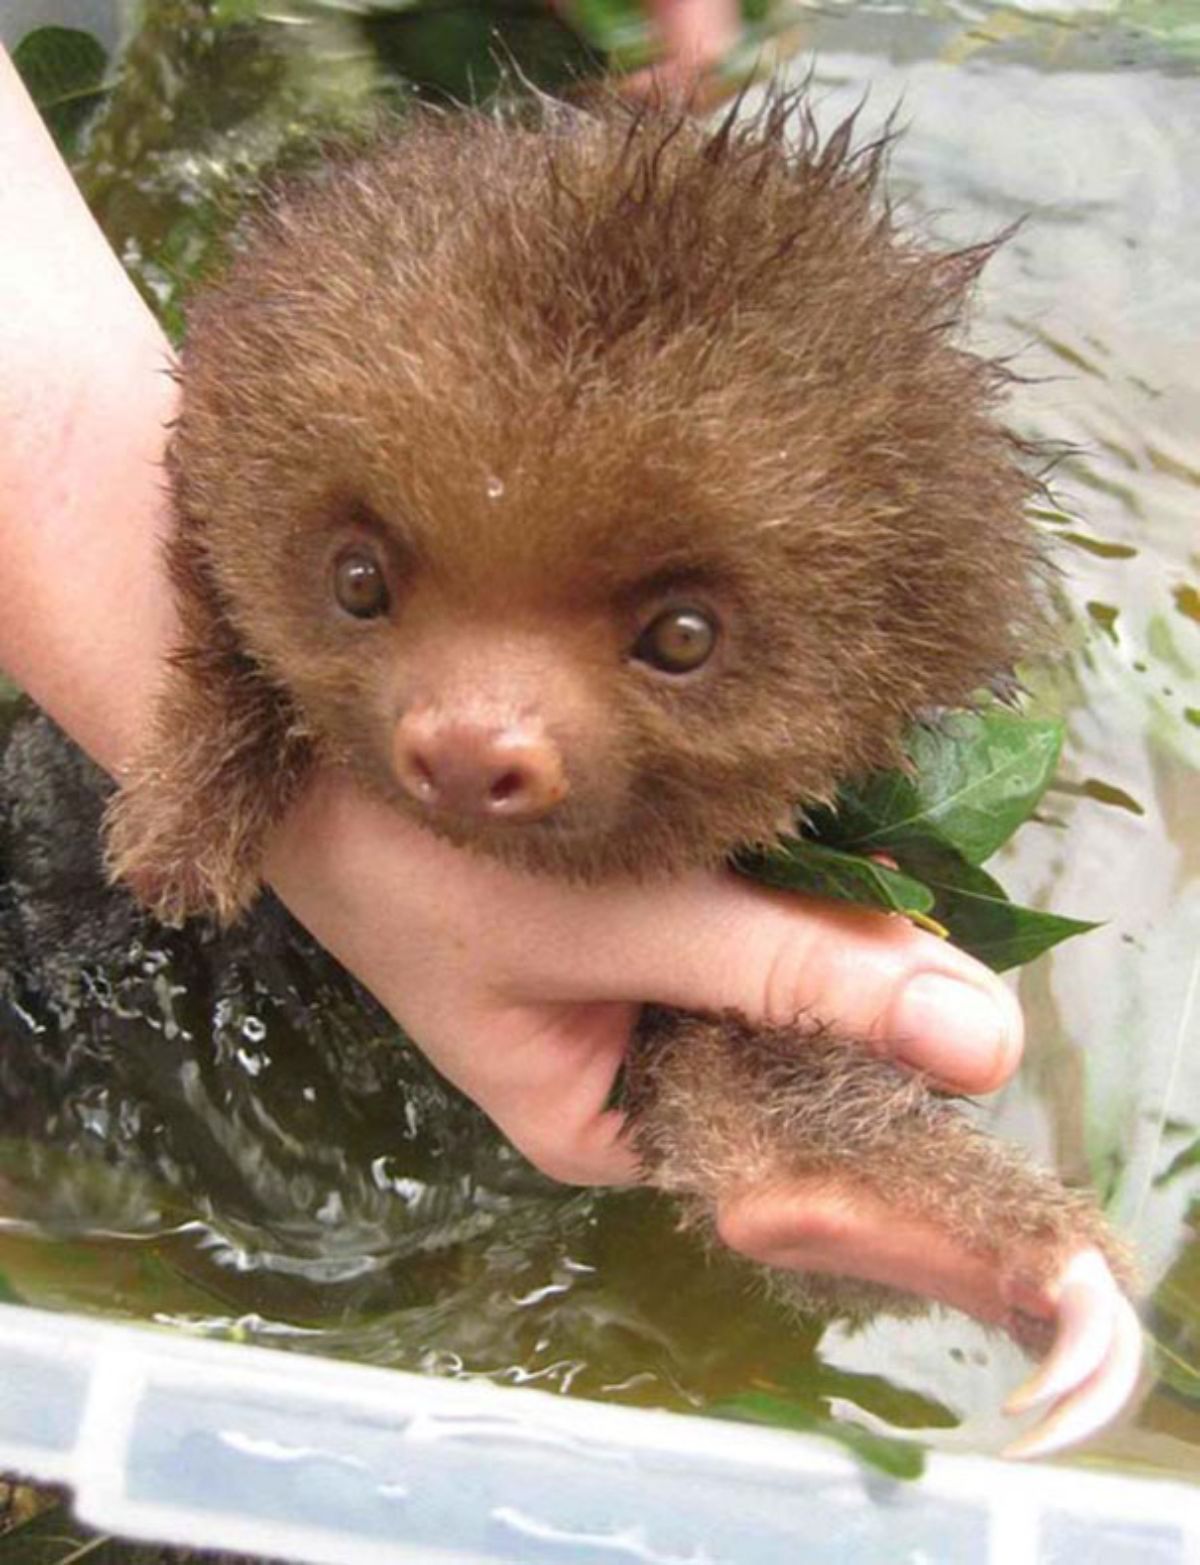 someone bathing a brown baby sloth